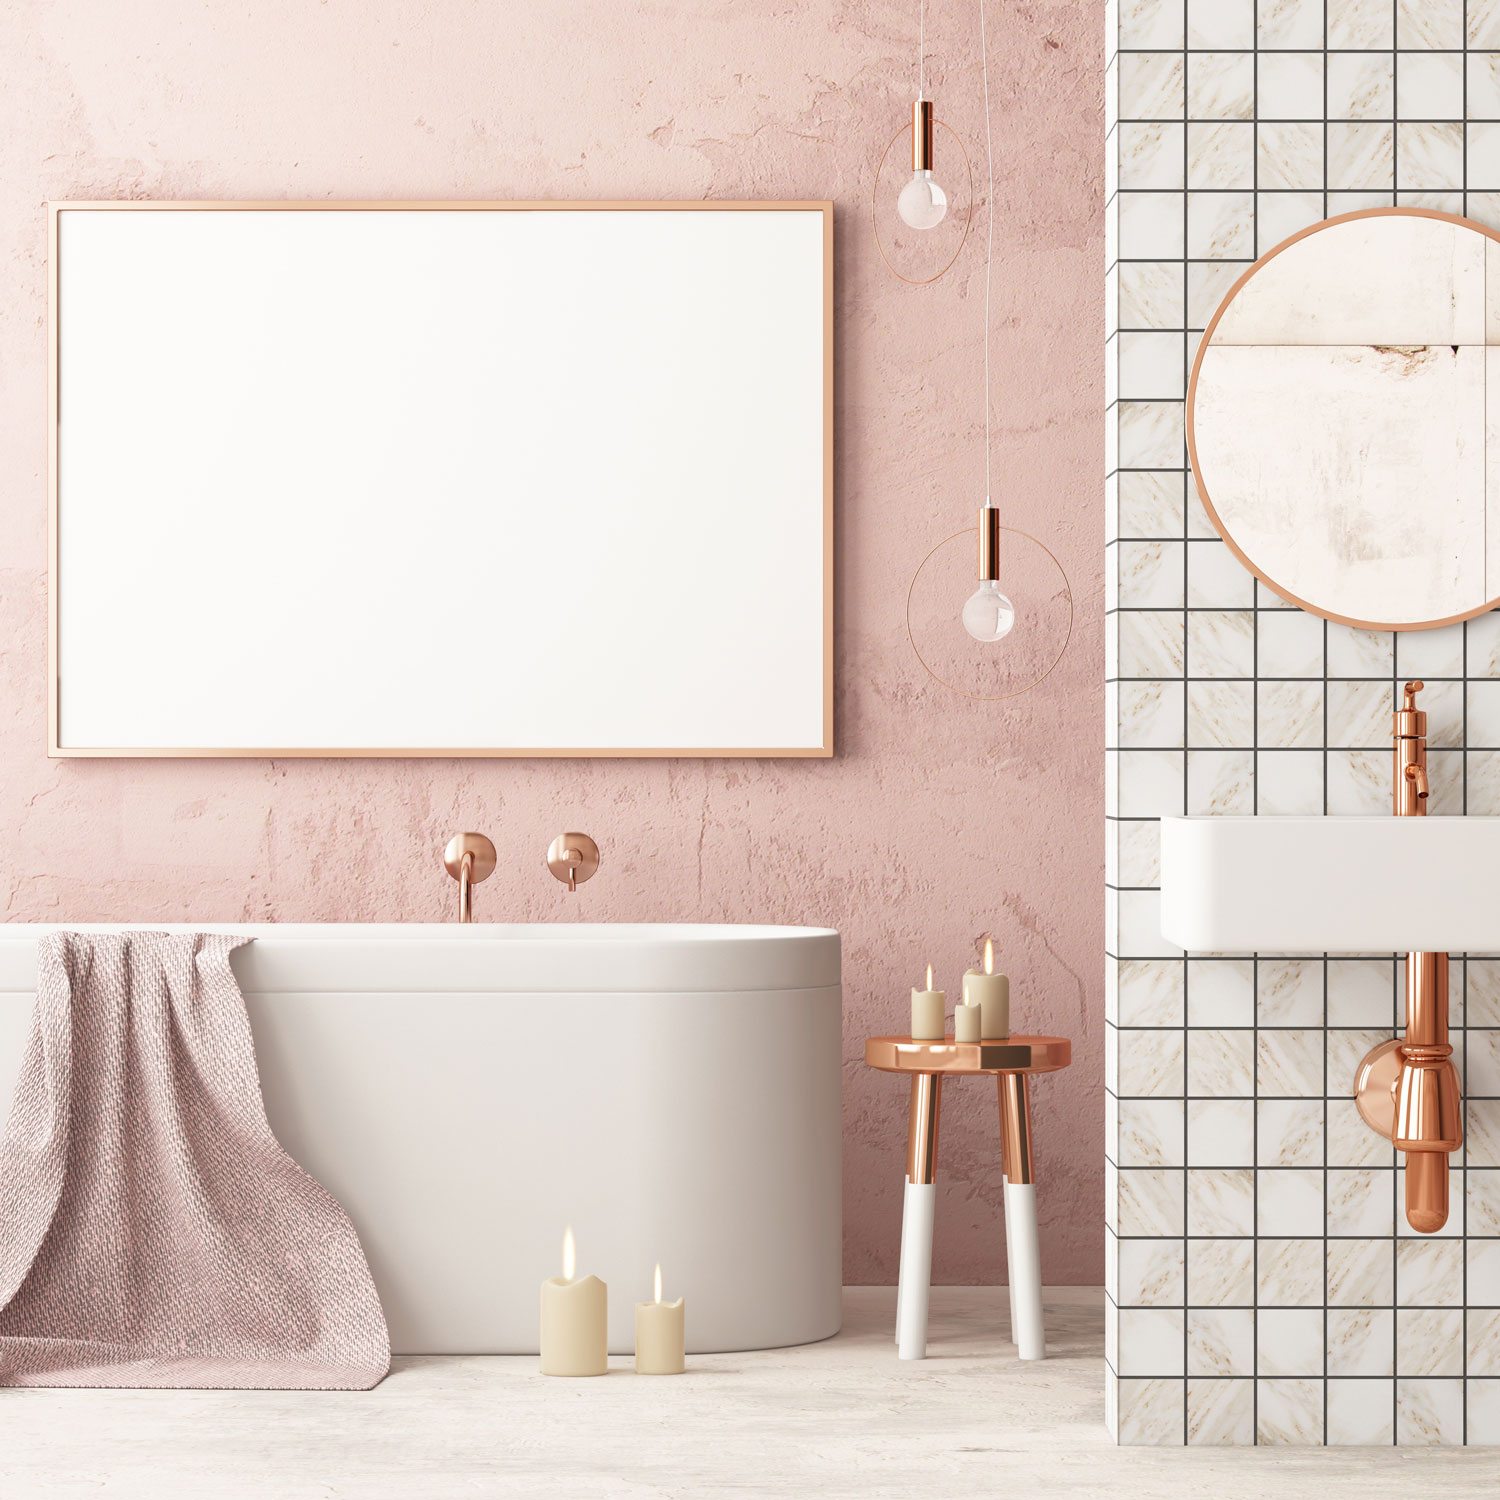 A pink boho themed bathroom with modern fixtures and accessories